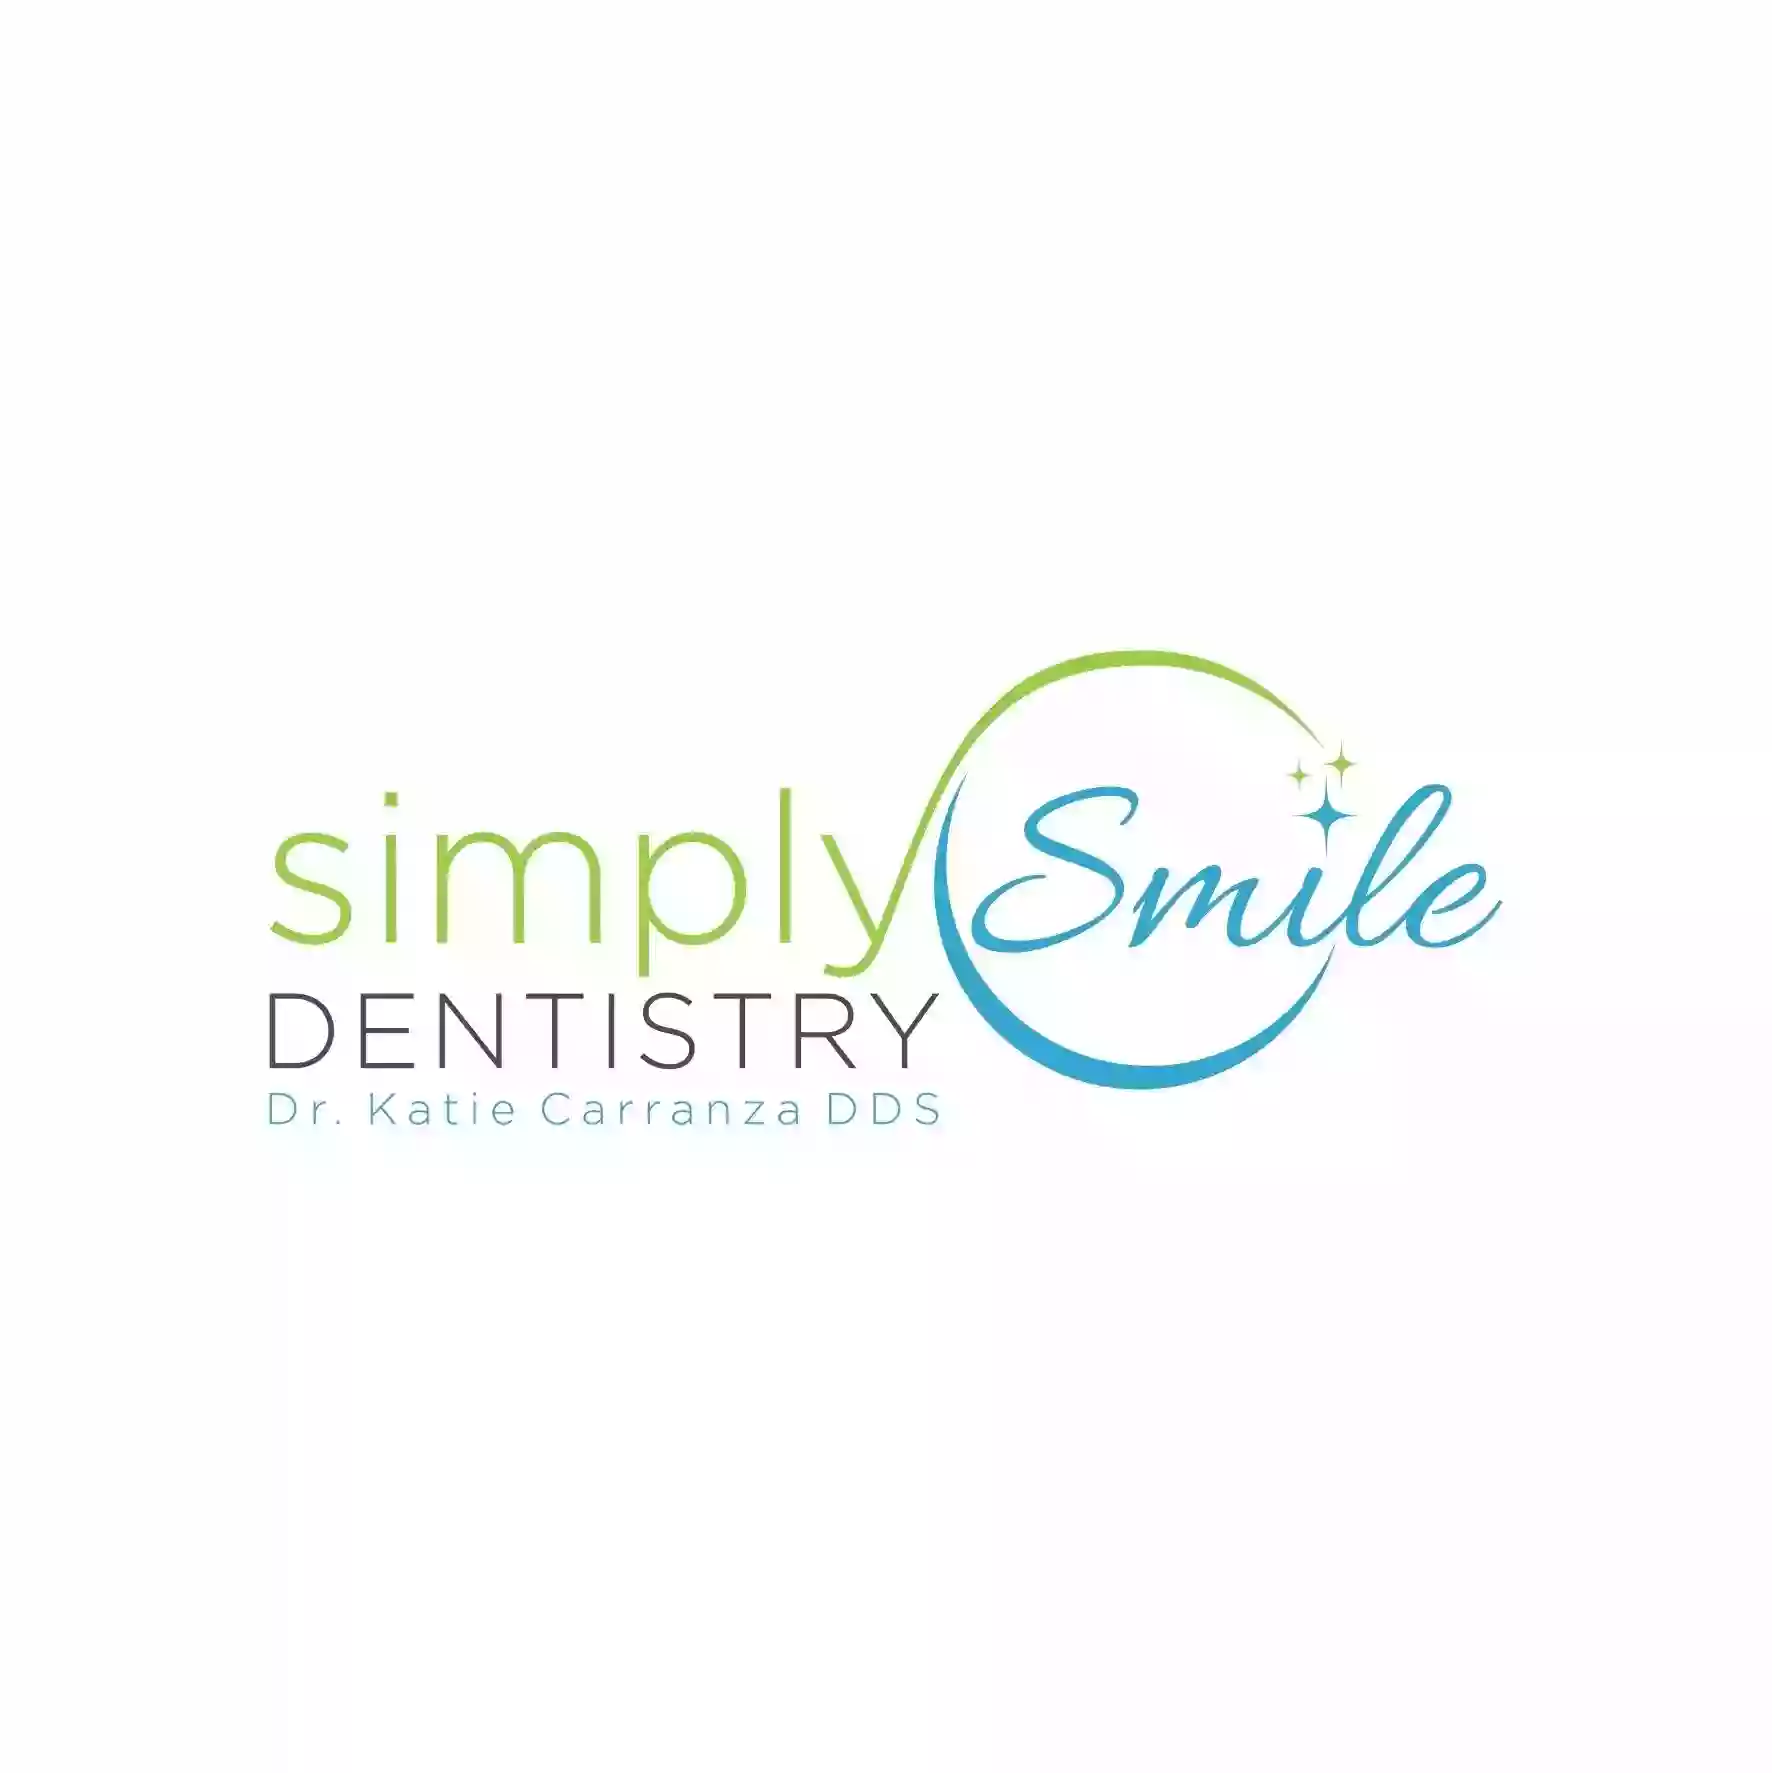 Simply Smile Dentistry- Dr. Katie Carranza DDS